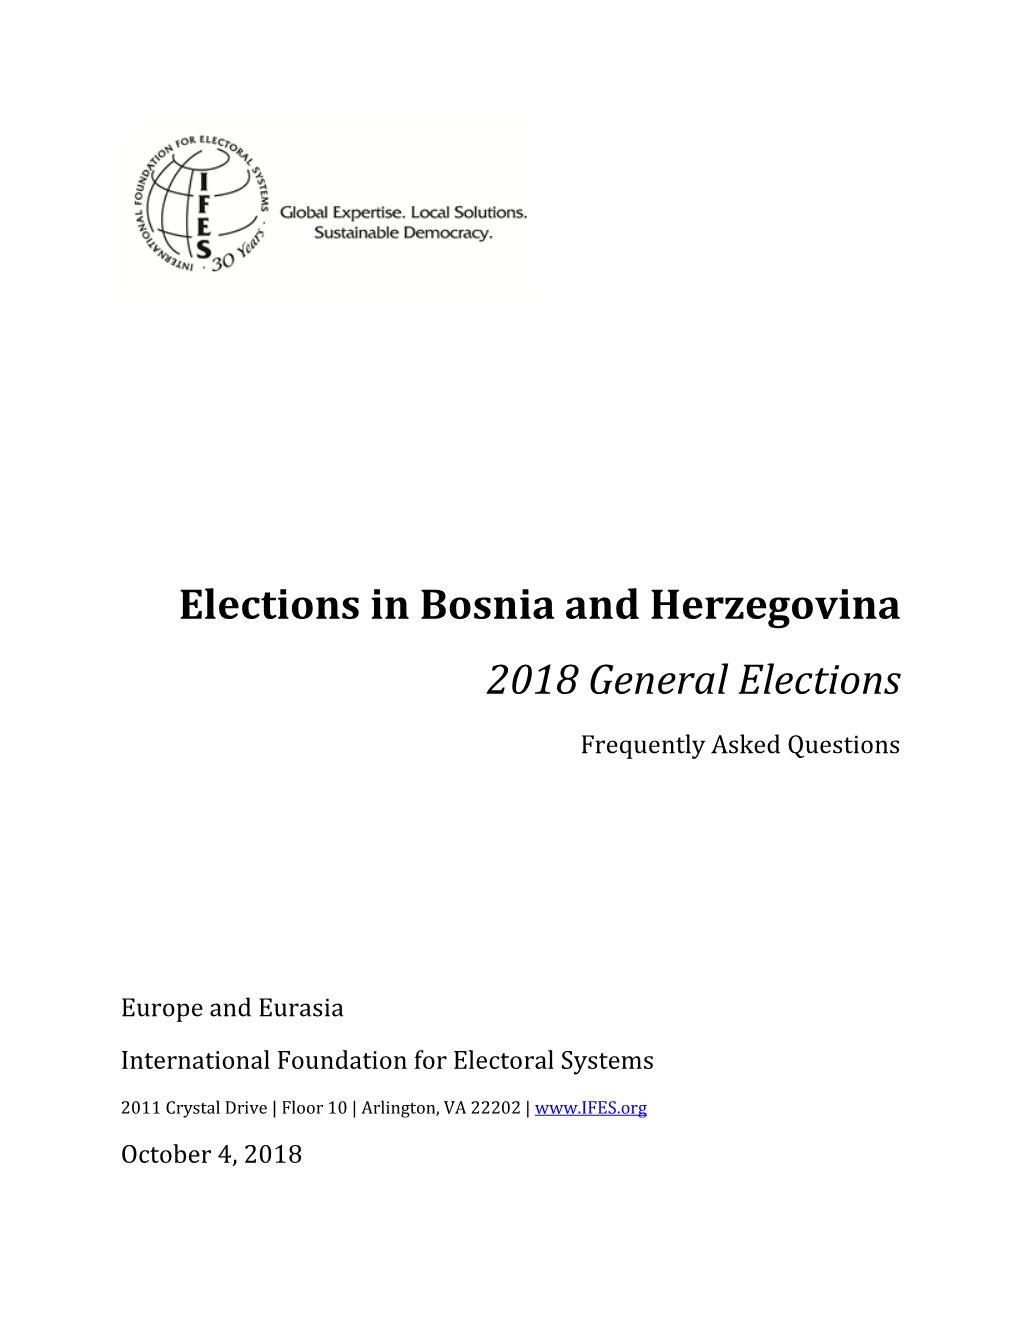 IFES Faqs on Elections in Bosnia and Herzegovina